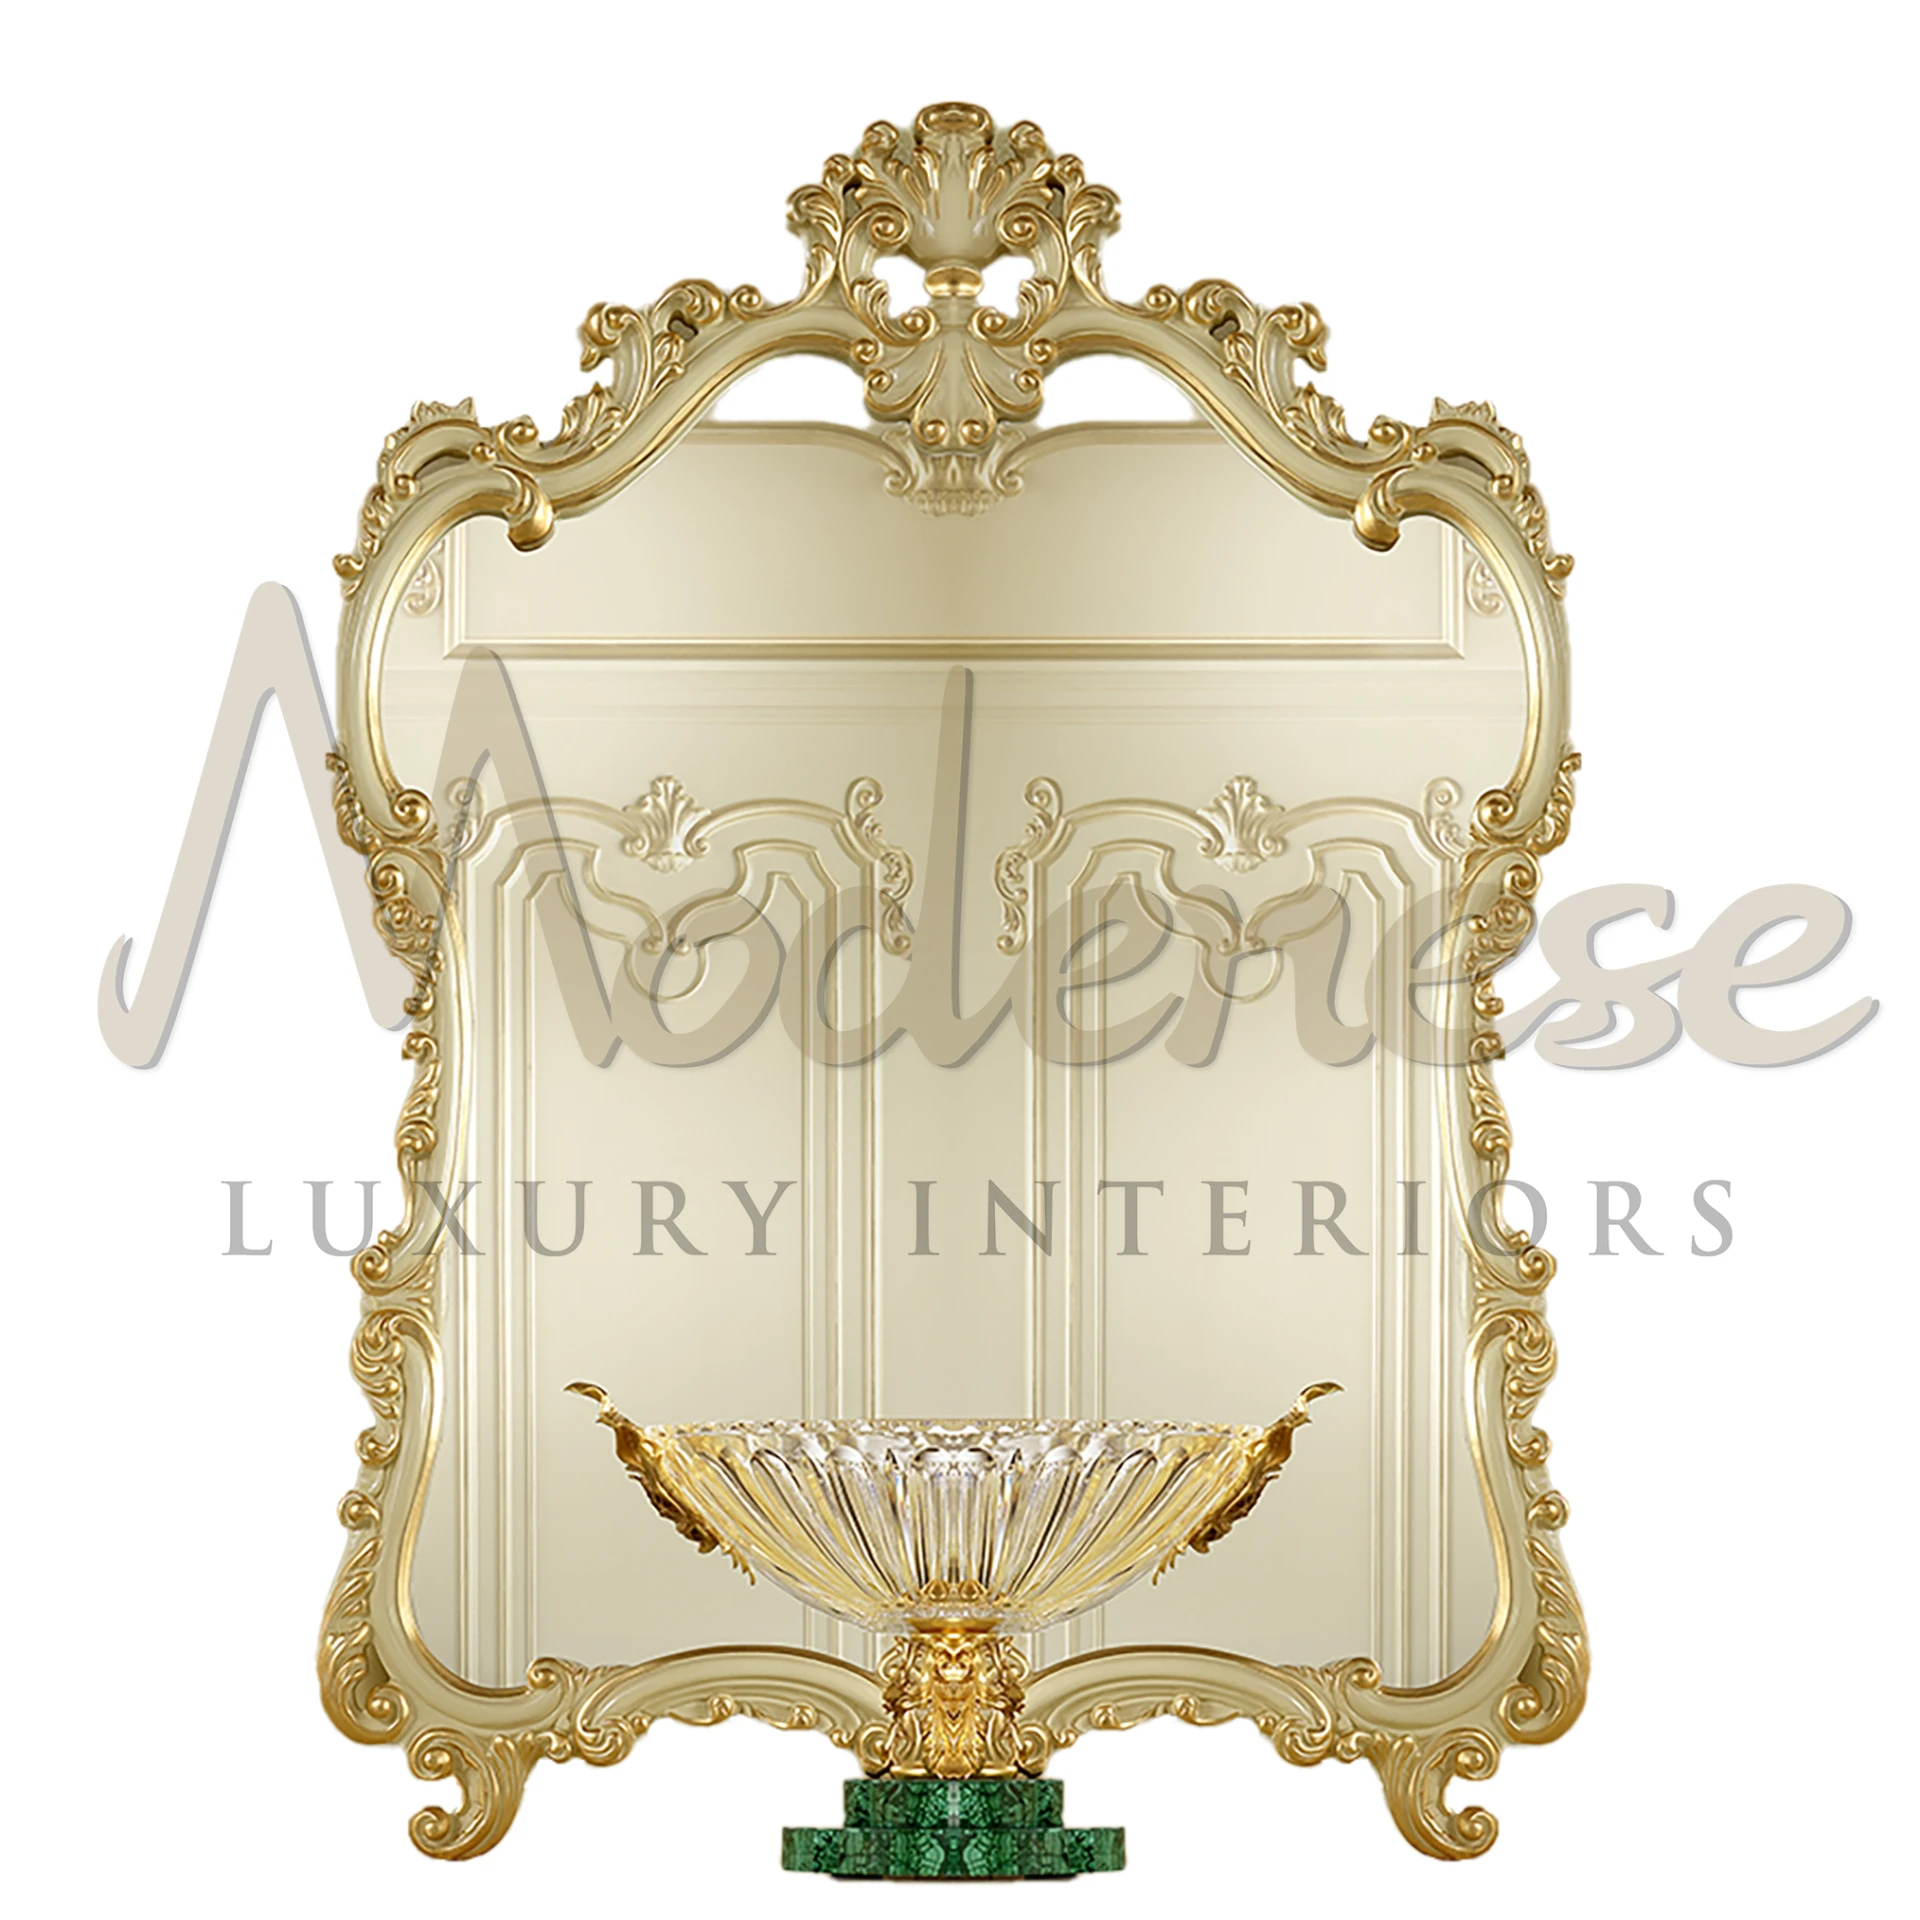 Elegant Gold Wall Mirror, a symbol of sophistication, perfect for adding a luxurious touch to interior design.